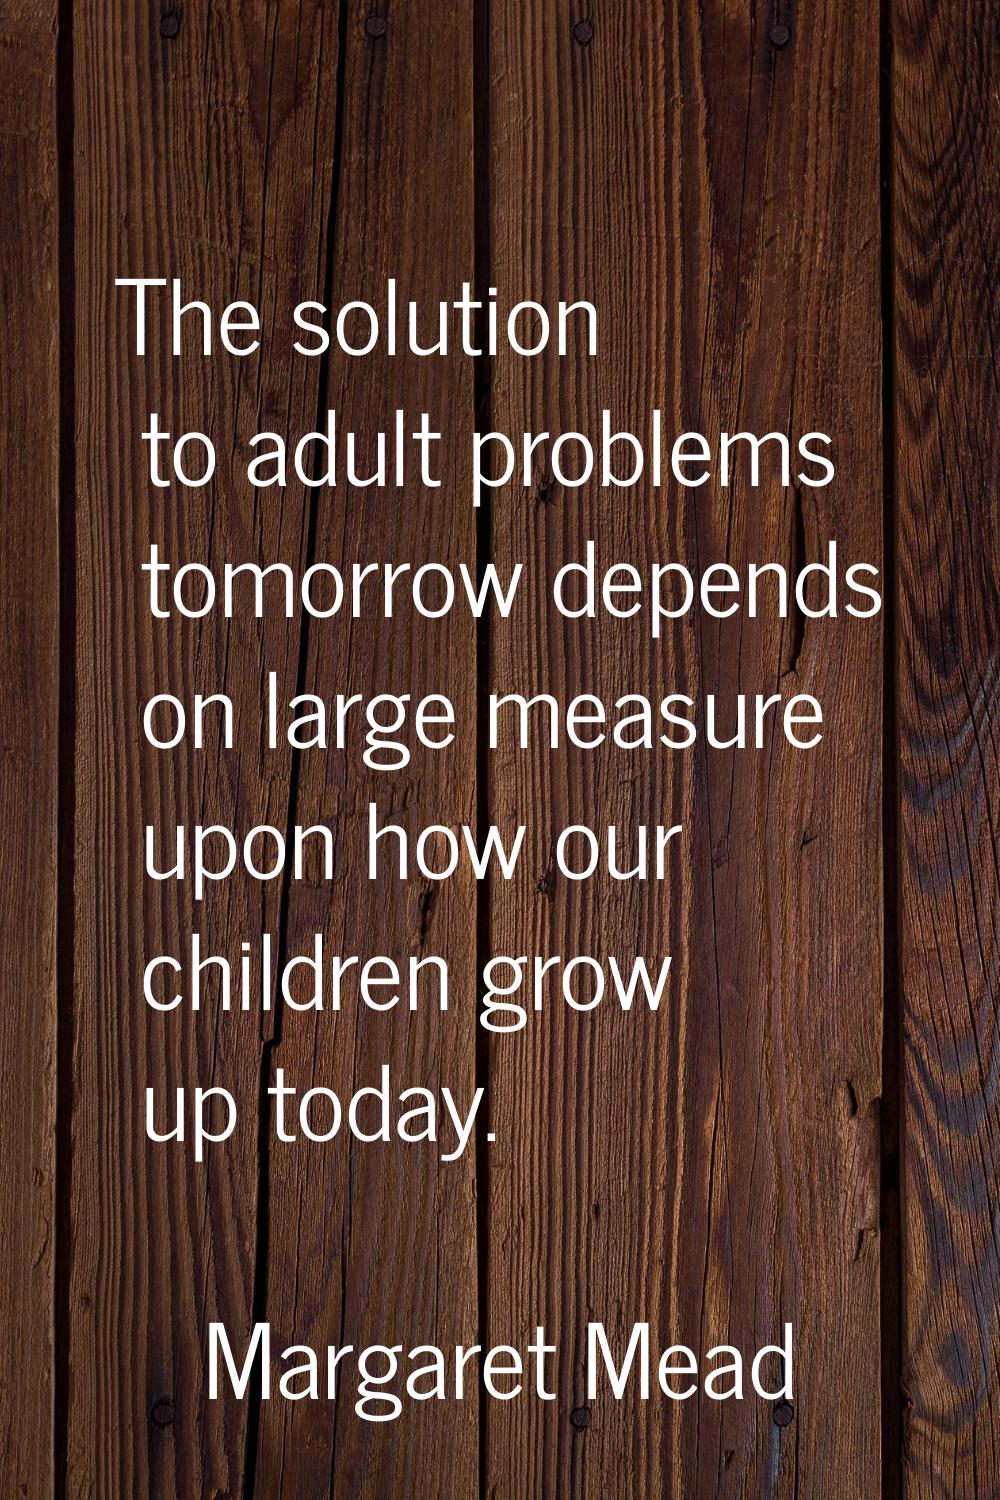 The solution to adult problems tomorrow depends on large measure upon how our children grow up toda